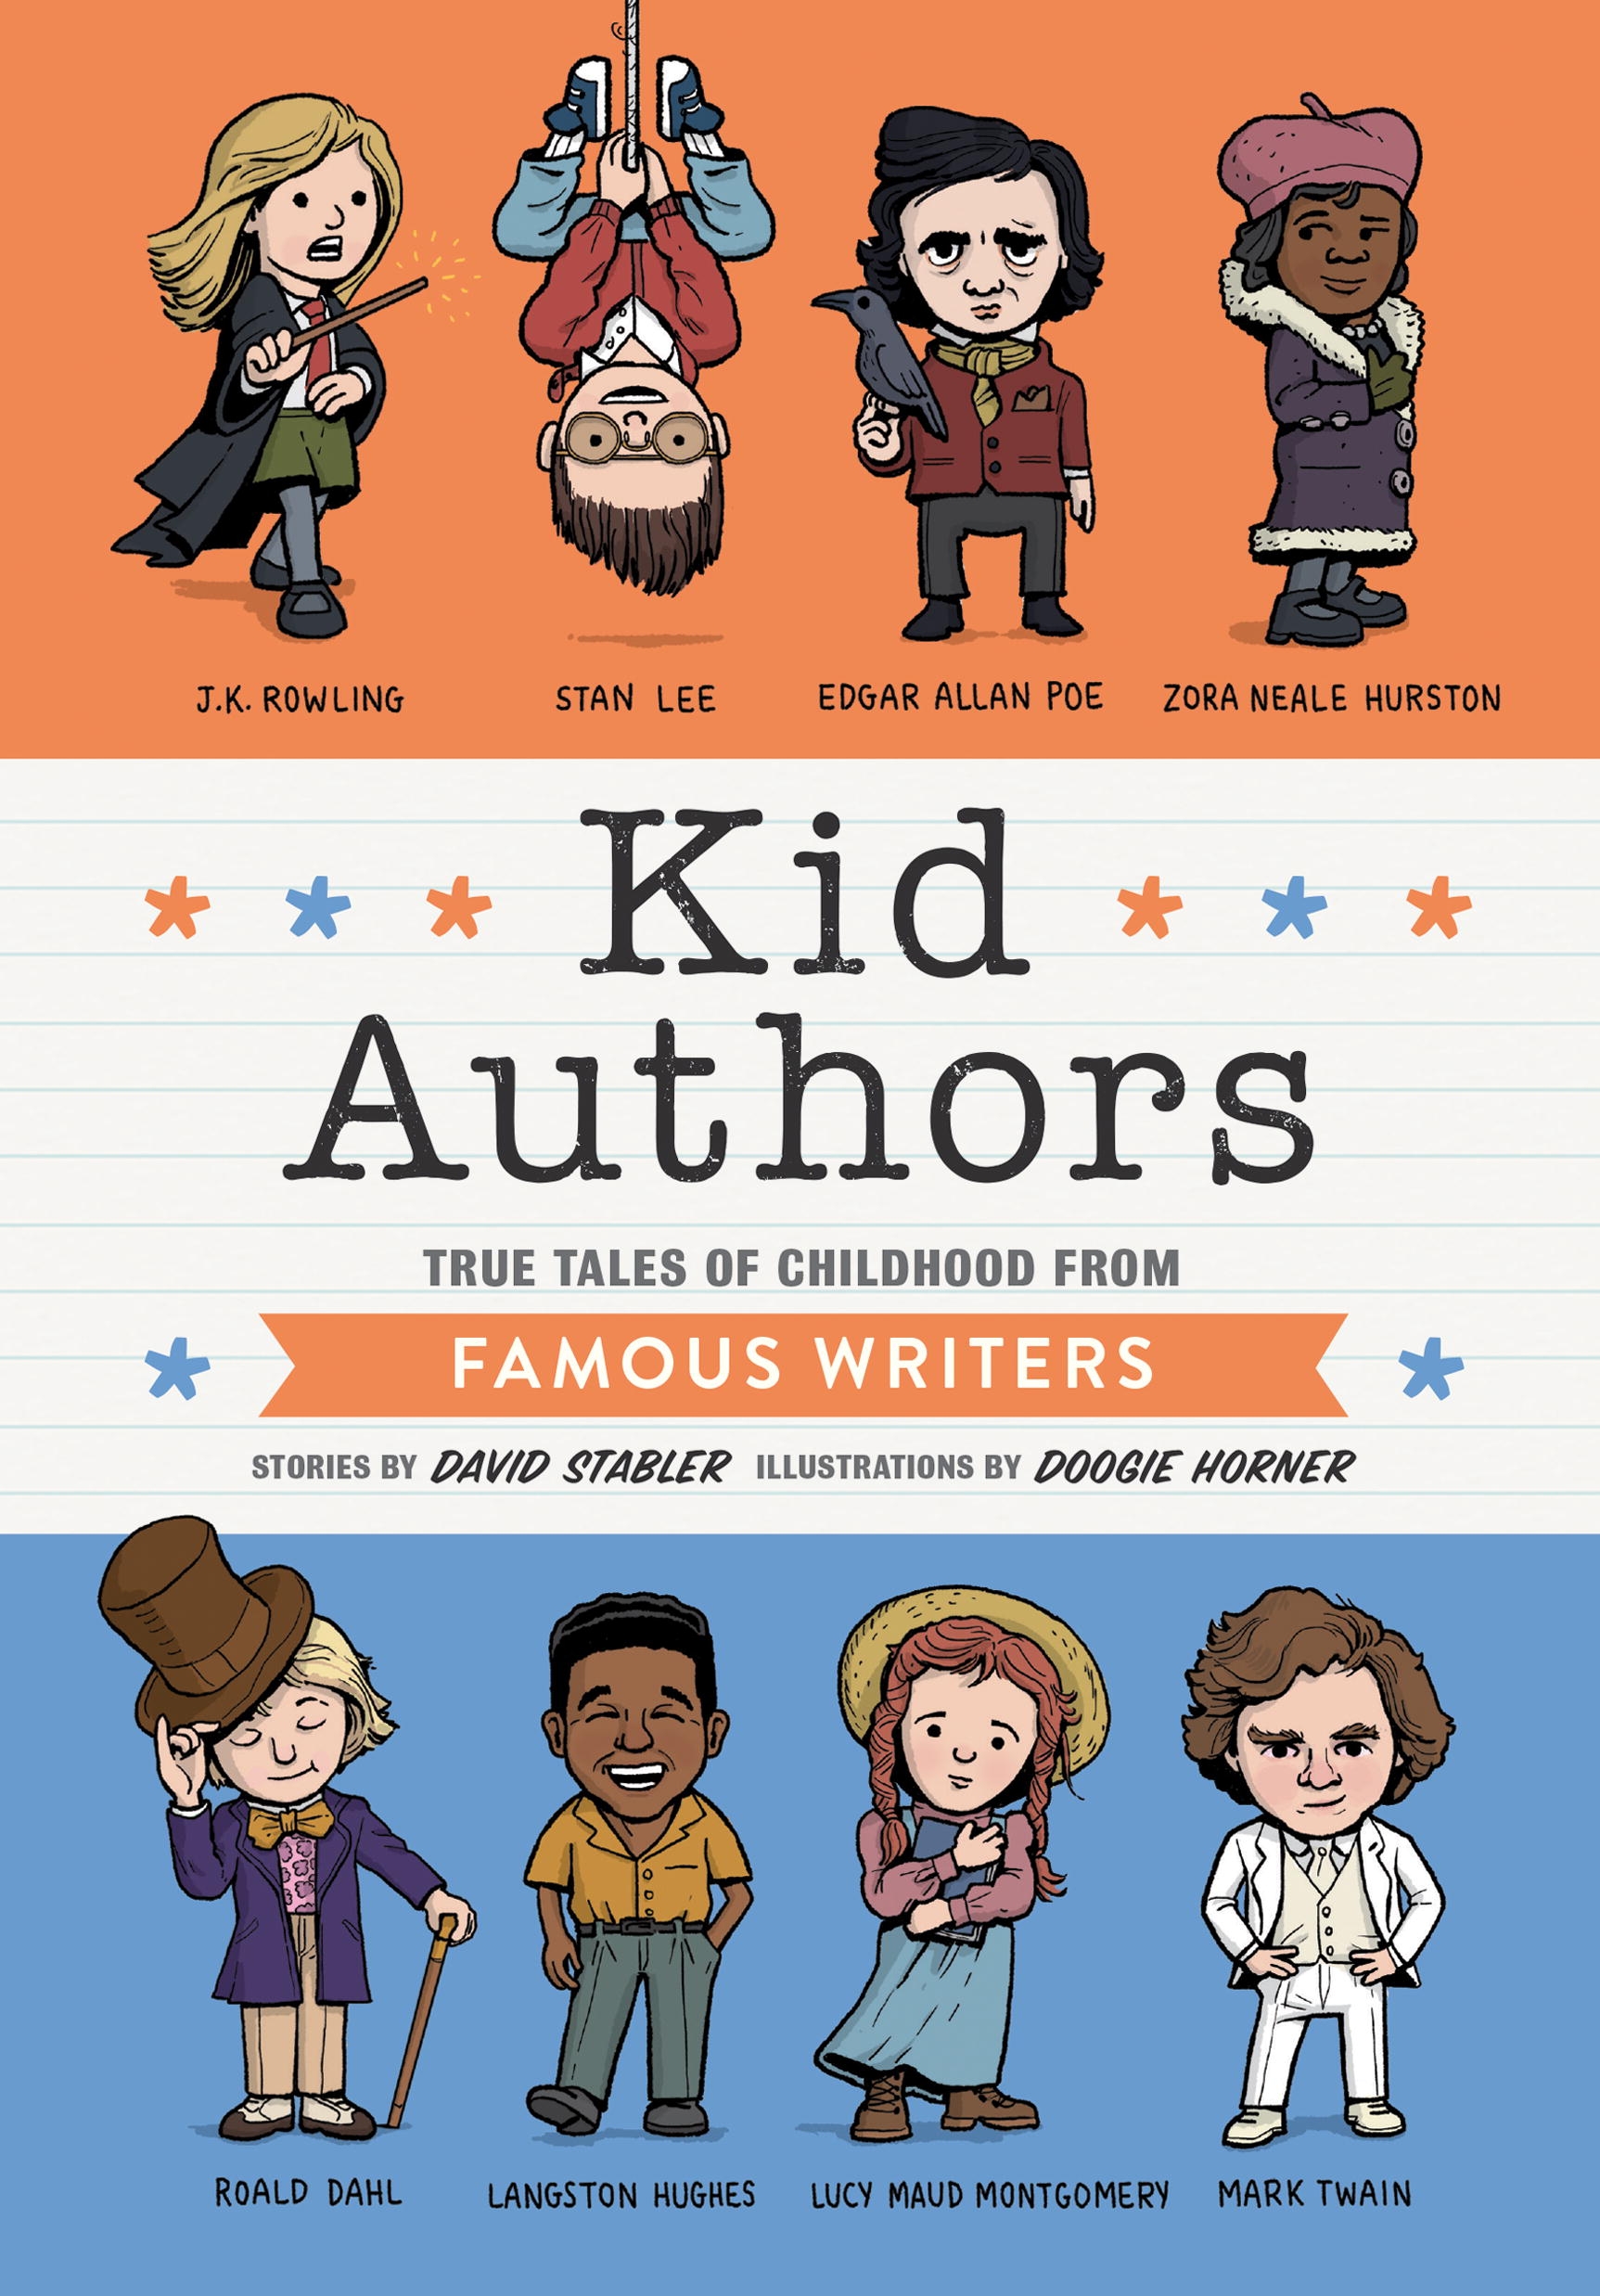 biography of children's book authors